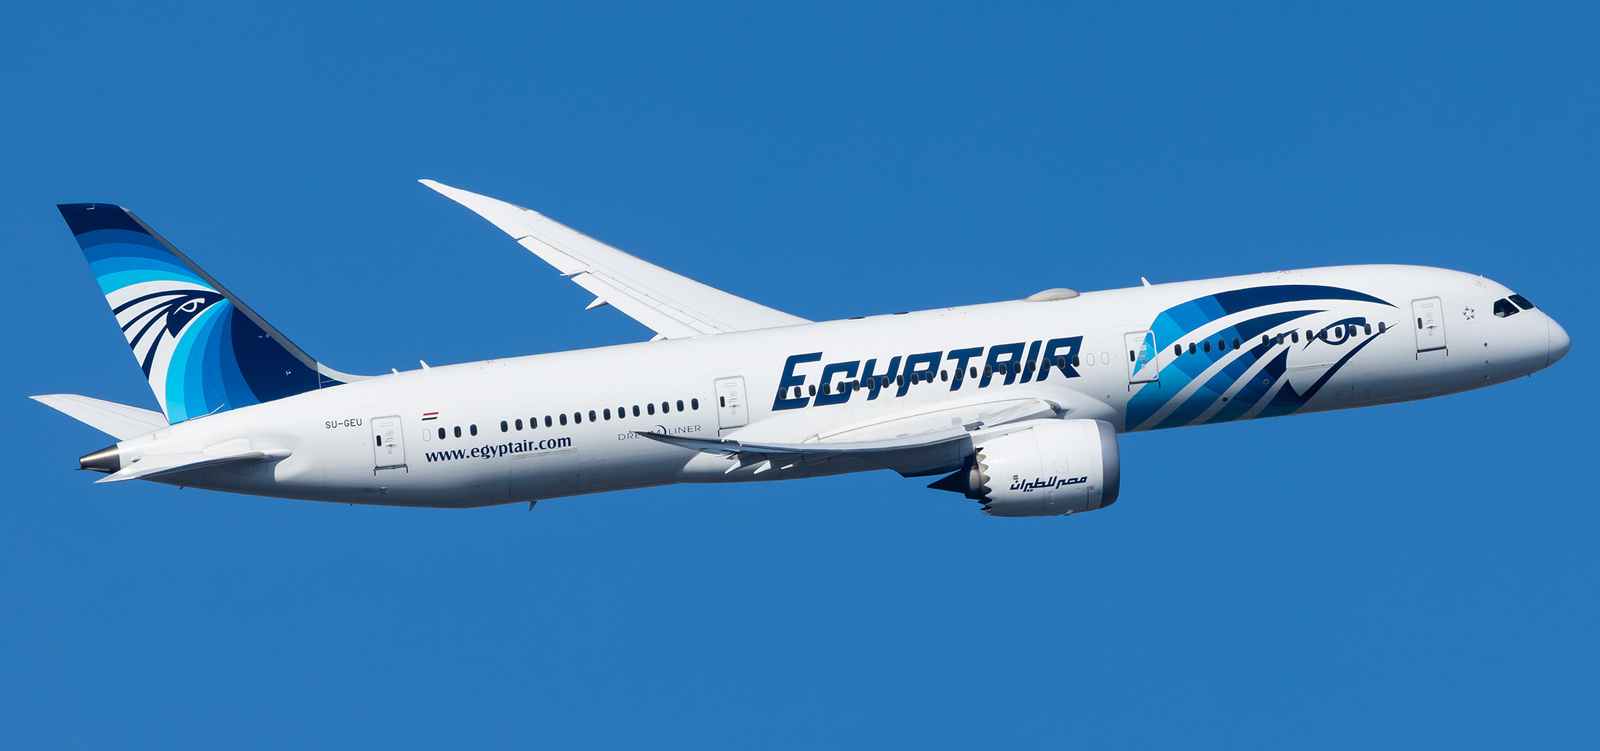 EgyptAir Completes First Commercial Flight Powered by Sustainable Aviation Fuel (SAF)